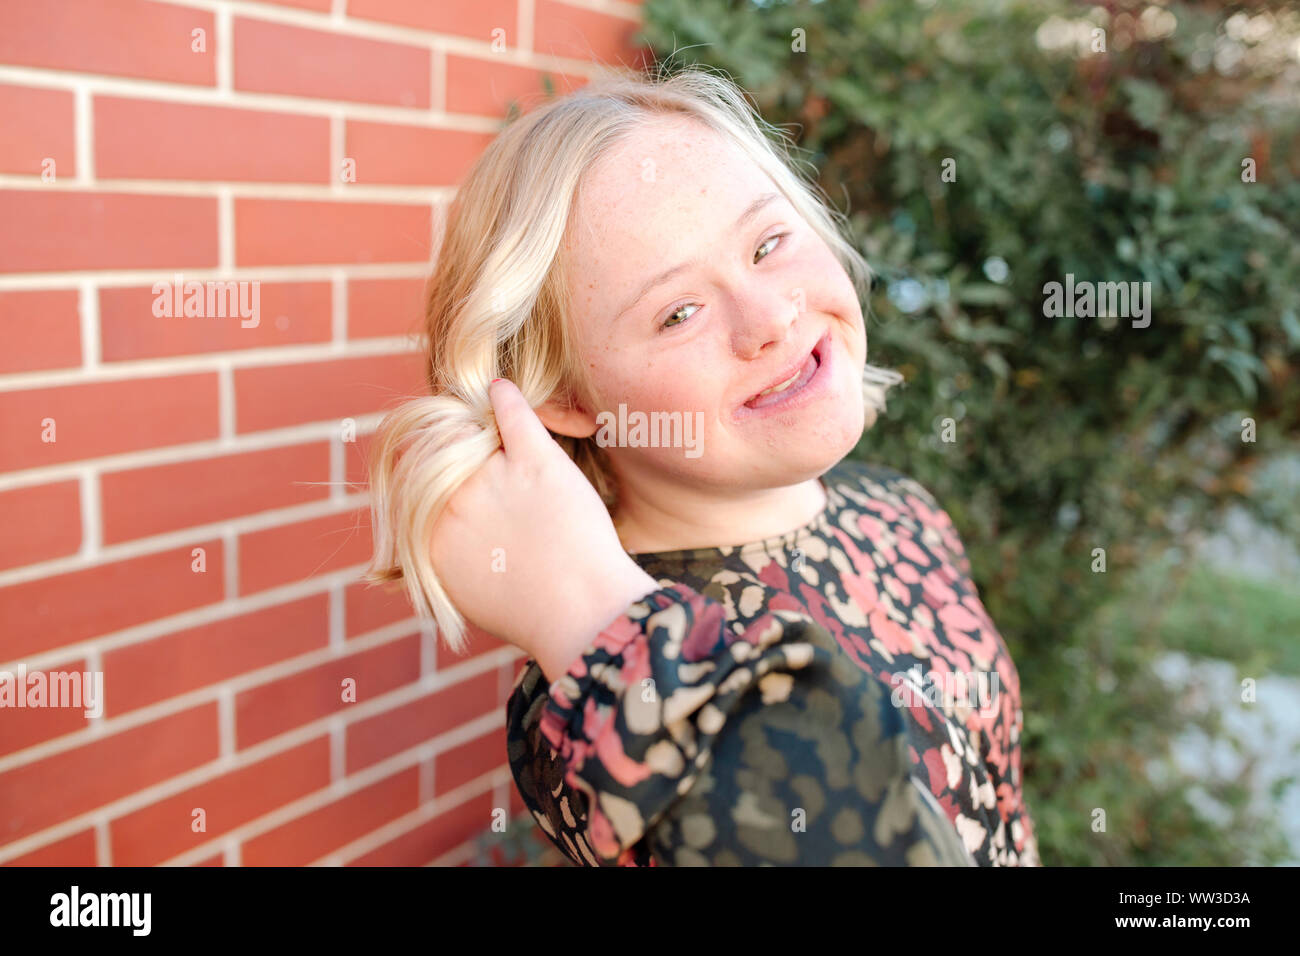 Smiling Teenage Girl With Down Syndrome Flips Hair Outside In Sunshine Stock Photo Alamy